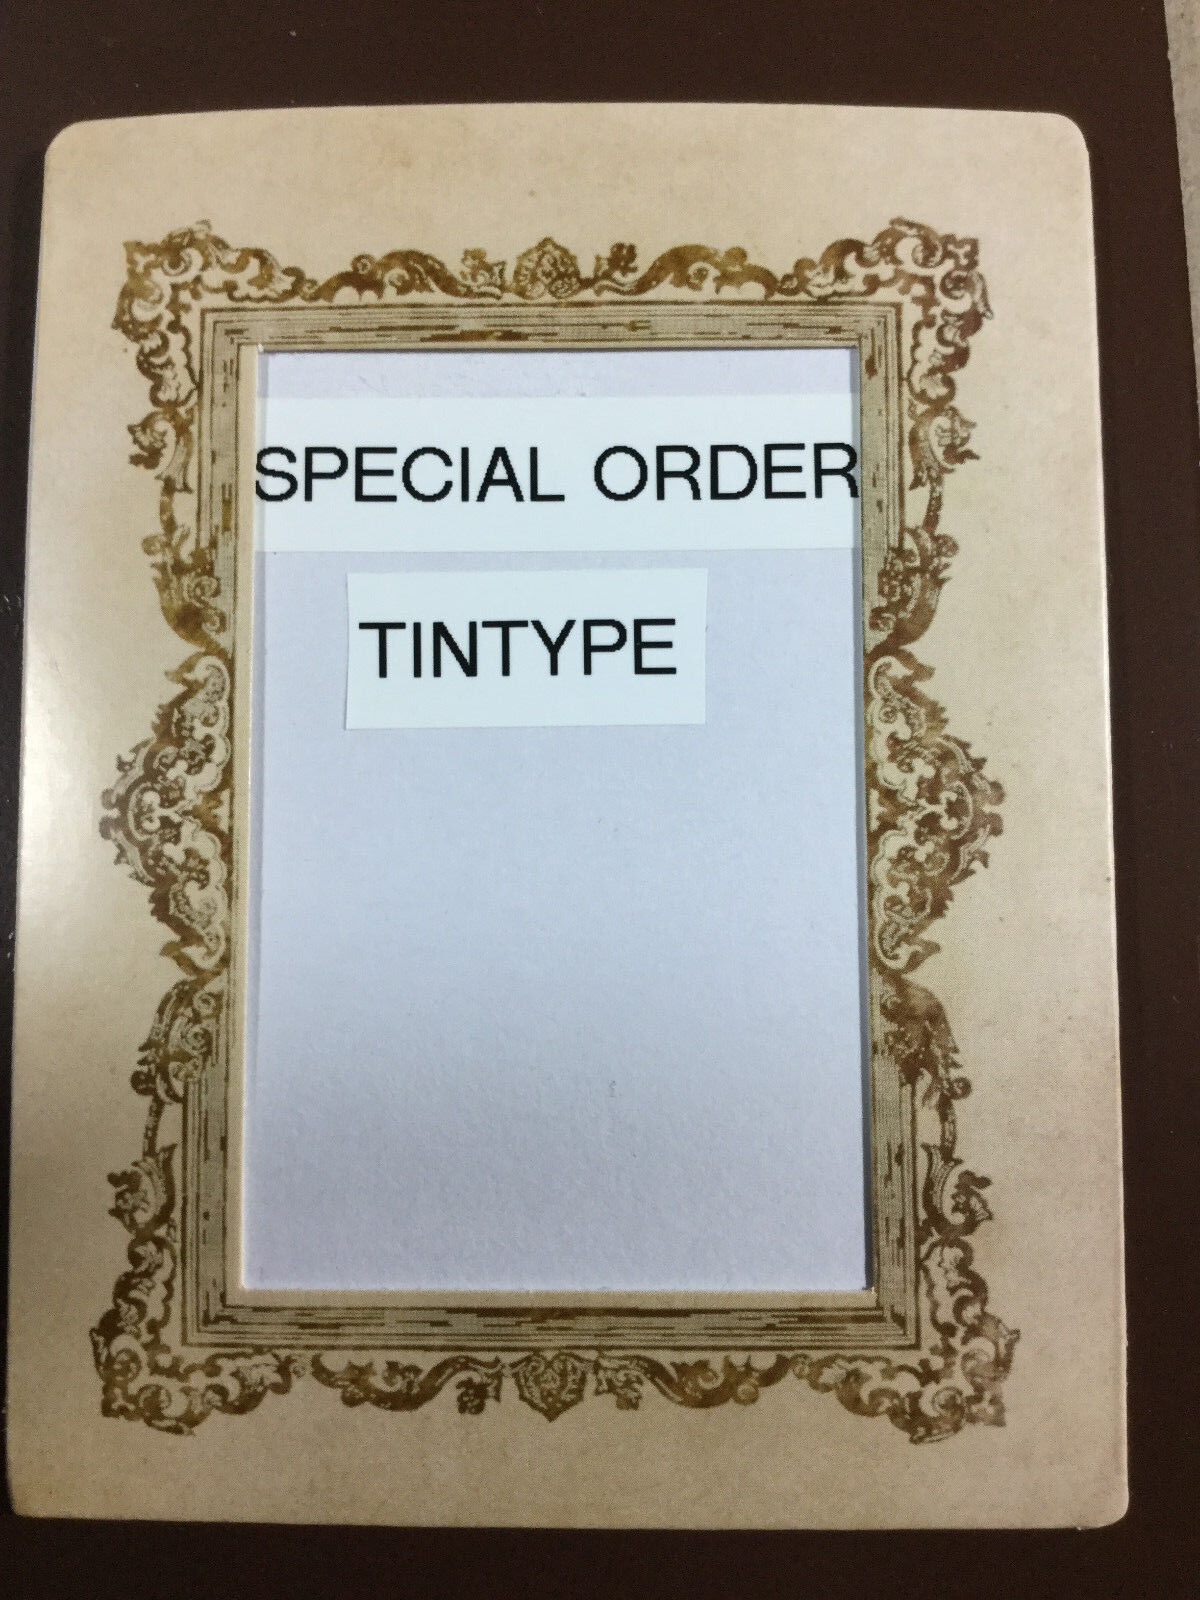 Upgrading  9th Plate SP Order tintype to a Sixth-Plate aprx size *2.50\